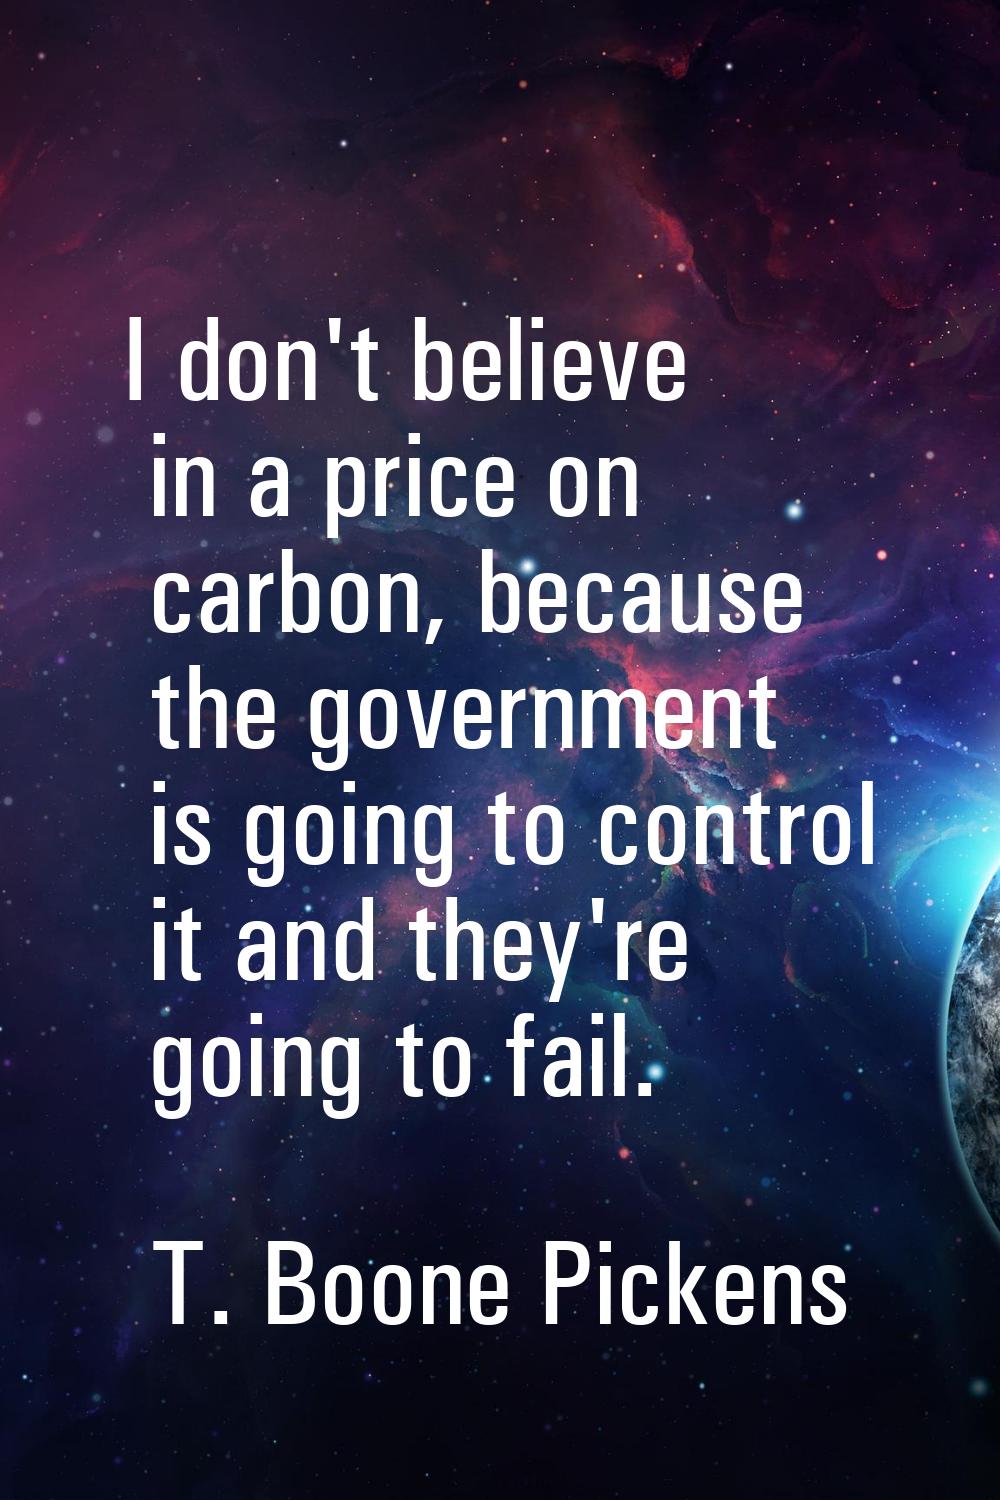 I don't believe in a price on carbon, because the government is going to control it and they're goi